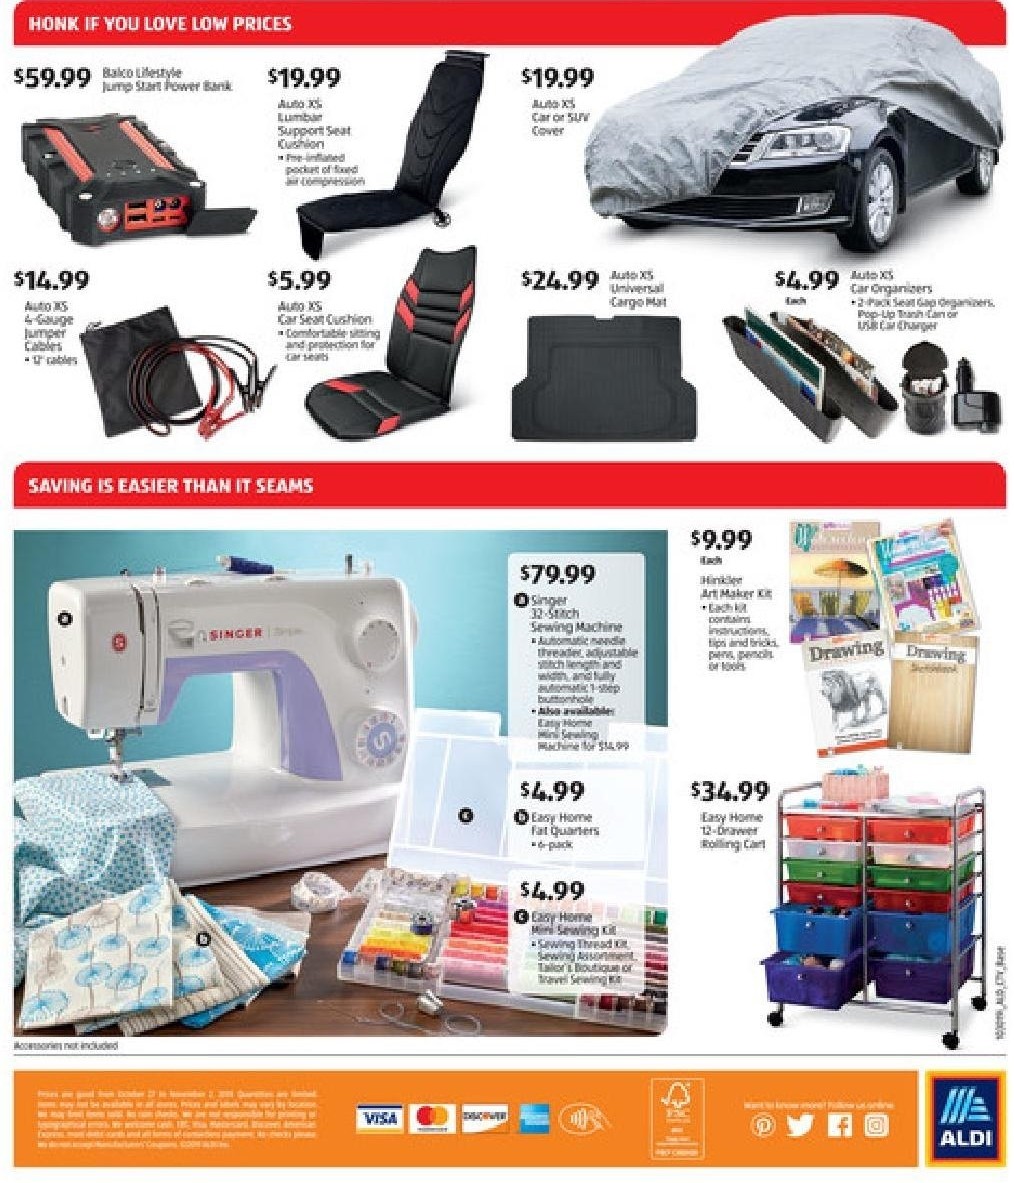 ALDI Weekly Ad from October 27